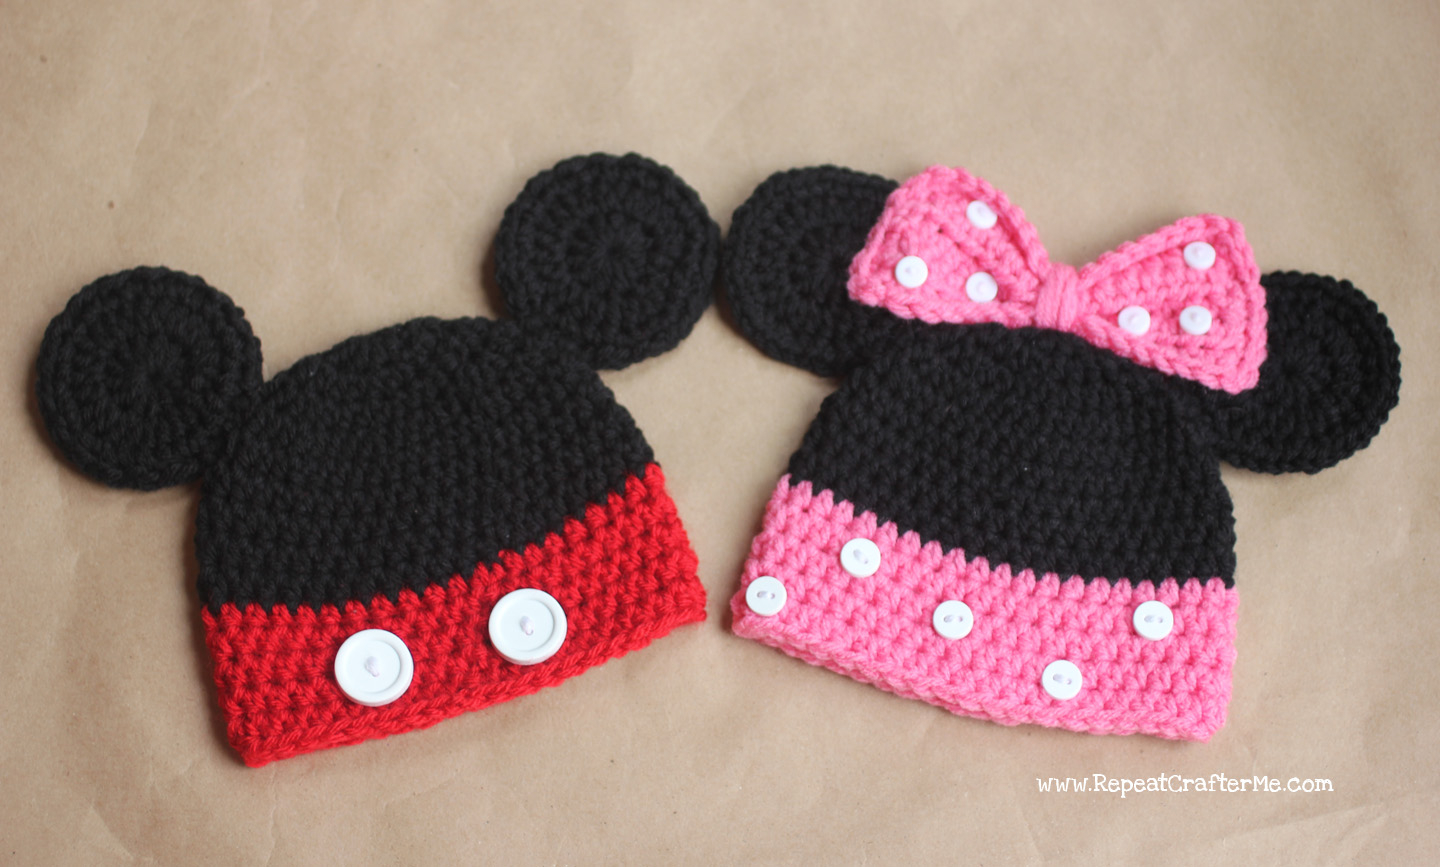 Free Crochet Pattern For Mickey Mouse Hat Mickey And Minnie Mouse Crochet Hat Pattern Repeat Crafter Me